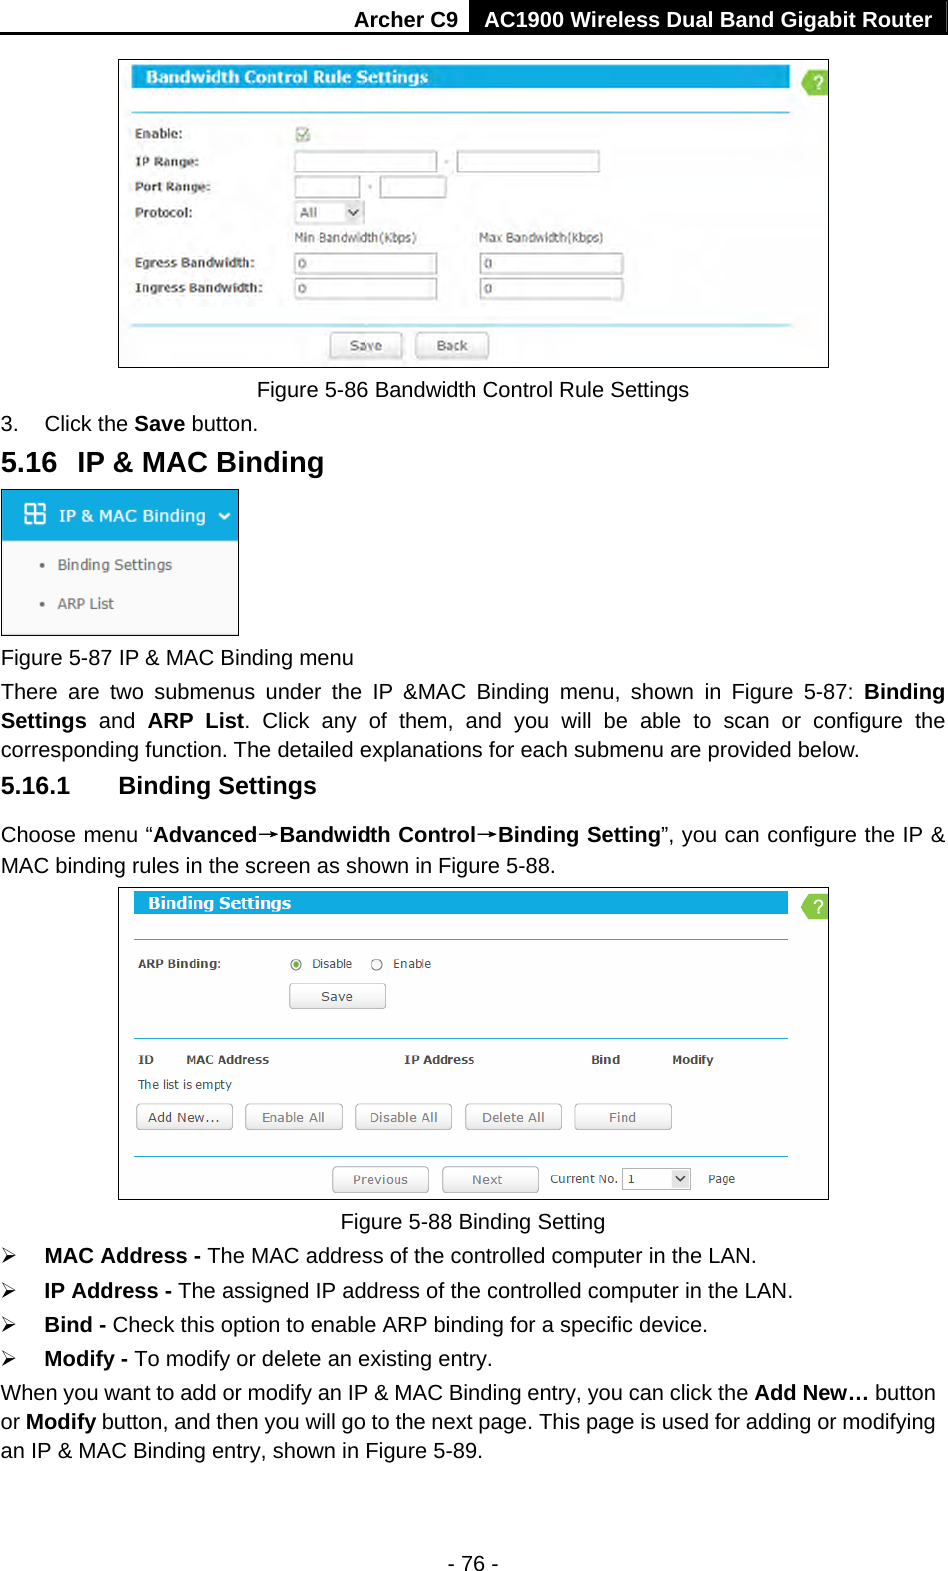 Archer C9 AC1900 Wireless Dual Band Gigabit Router - 76 -  Figure 5-86 Bandwidth Control Rule Settings 3. Click the Save button. 5.16  IP &amp; MAC Binding  Figure 5-87 IP &amp; MAC Binding menu There are two submenus under the IP &amp;MAC Binding menu, shown in Figure 5-87: Binding Settings  and ARP List. Click any of them, and you will be able to scan or configure the corresponding function. The detailed explanations for each submenu are provided below. 5.16.1  Binding Settings Choose menu “Advanced→Bandwidth Control→Binding Setting”, you can configure the IP &amp; MAC binding rules in the screen as shown in Figure 5-88.    Figure 5-88 Binding Setting  MAC Address - The MAC address of the controlled computer in the LAN.    IP Address - The assigned IP address of the controlled computer in the LAN.    Bind - Check this option to enable ARP binding for a specific device.    Modify - To modify or delete an existing entry.   When you want to add or modify an IP &amp; MAC Binding entry, you can click the Add New… button or Modify button, and then you will go to the next page. This page is used for adding or modifying an IP &amp; MAC Binding entry, shown in Figure 5-89.   